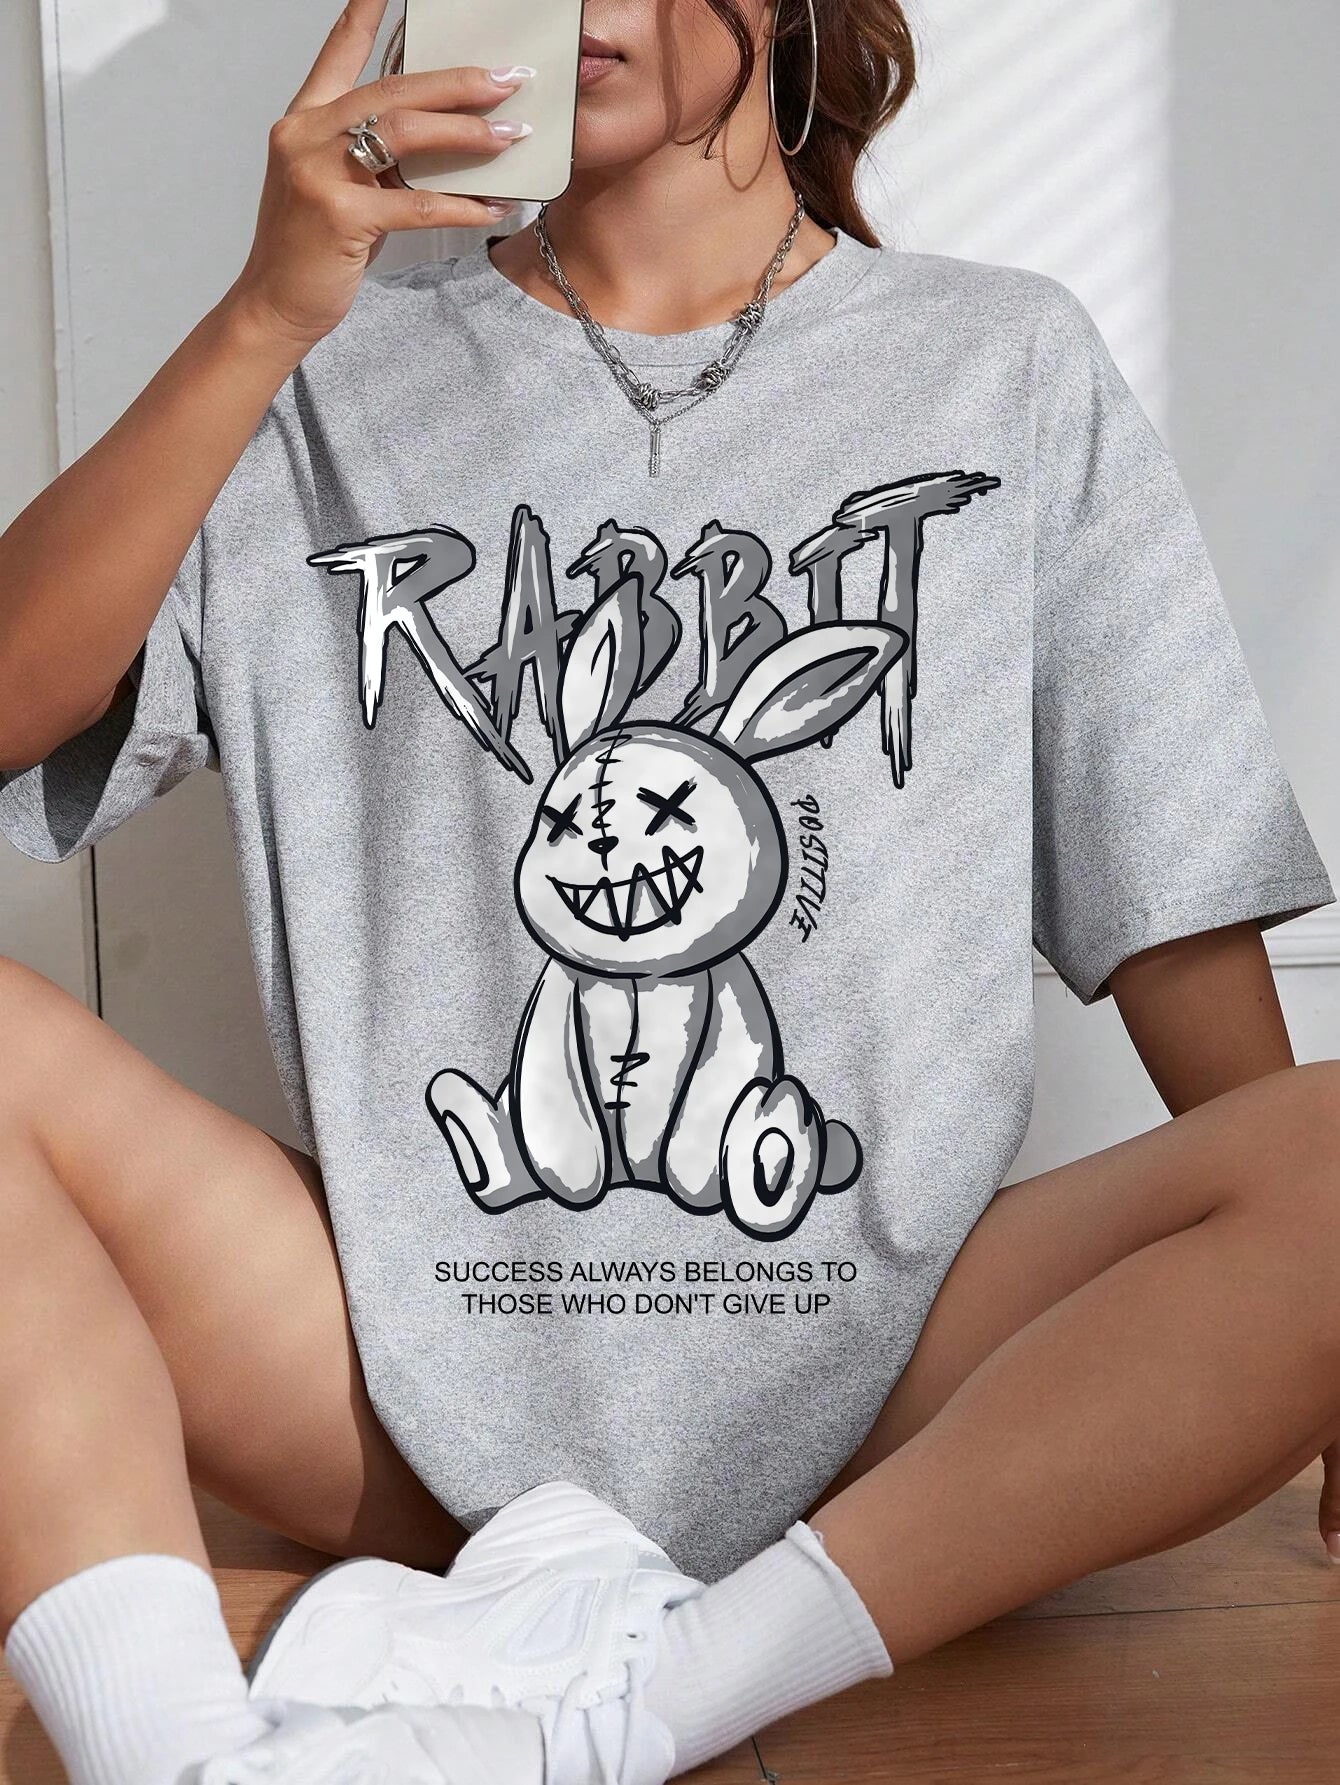 Gritty Graffiti Bunny Oversized Tee – Motivational Street Style Top - Gray / S - T-Shirts - Shirts & Tops - 10 - 2024